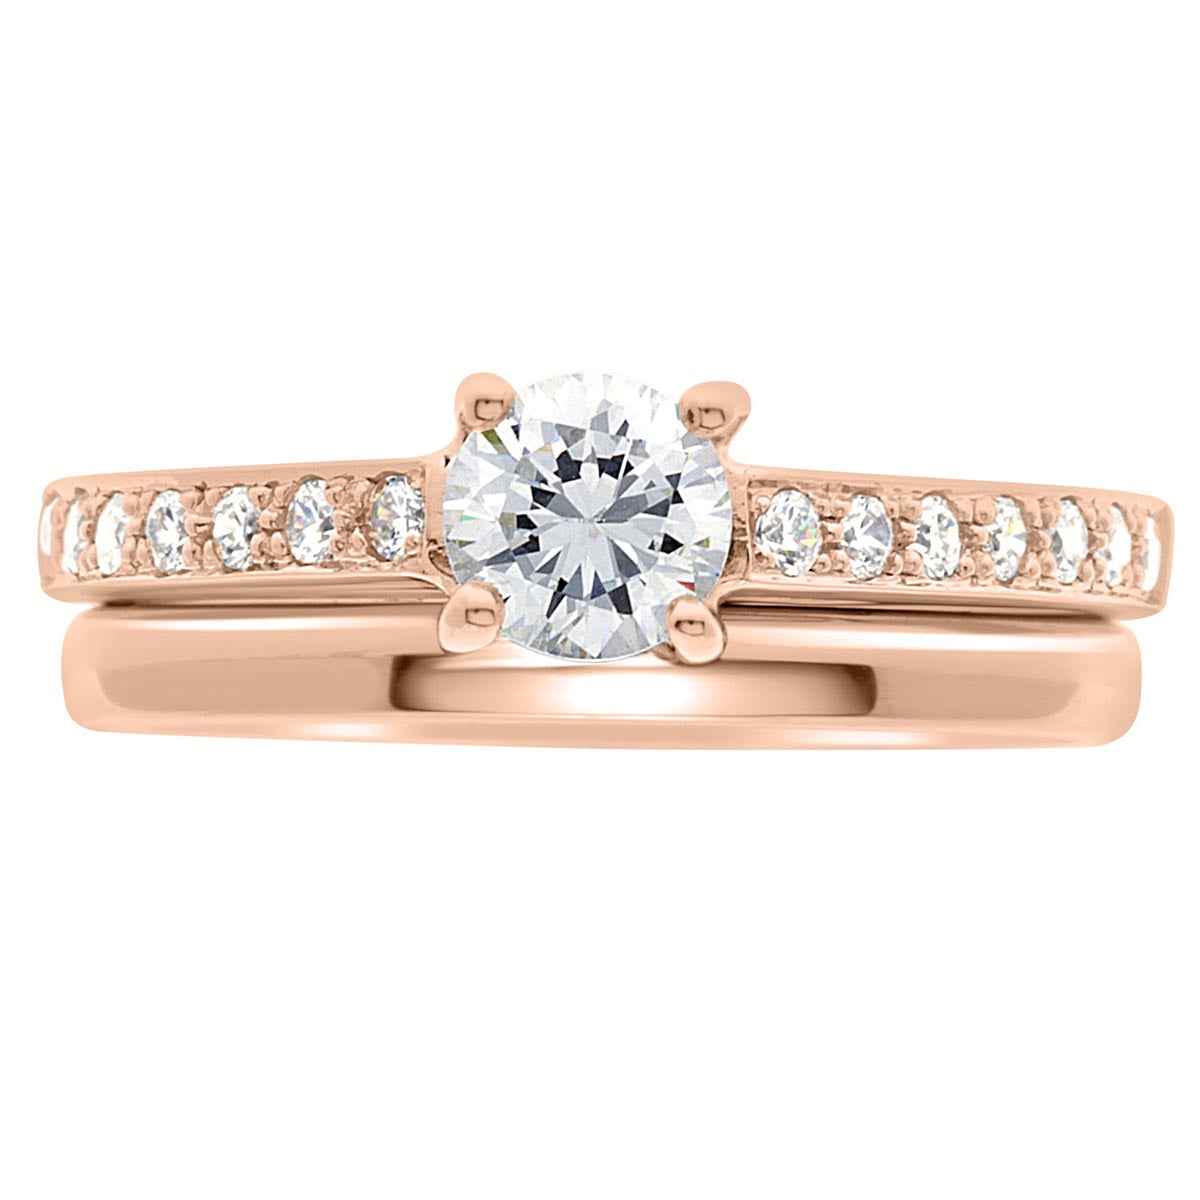 Pavé Diamond Ring manufactured in rose gold  pictured with a plain wedding ring